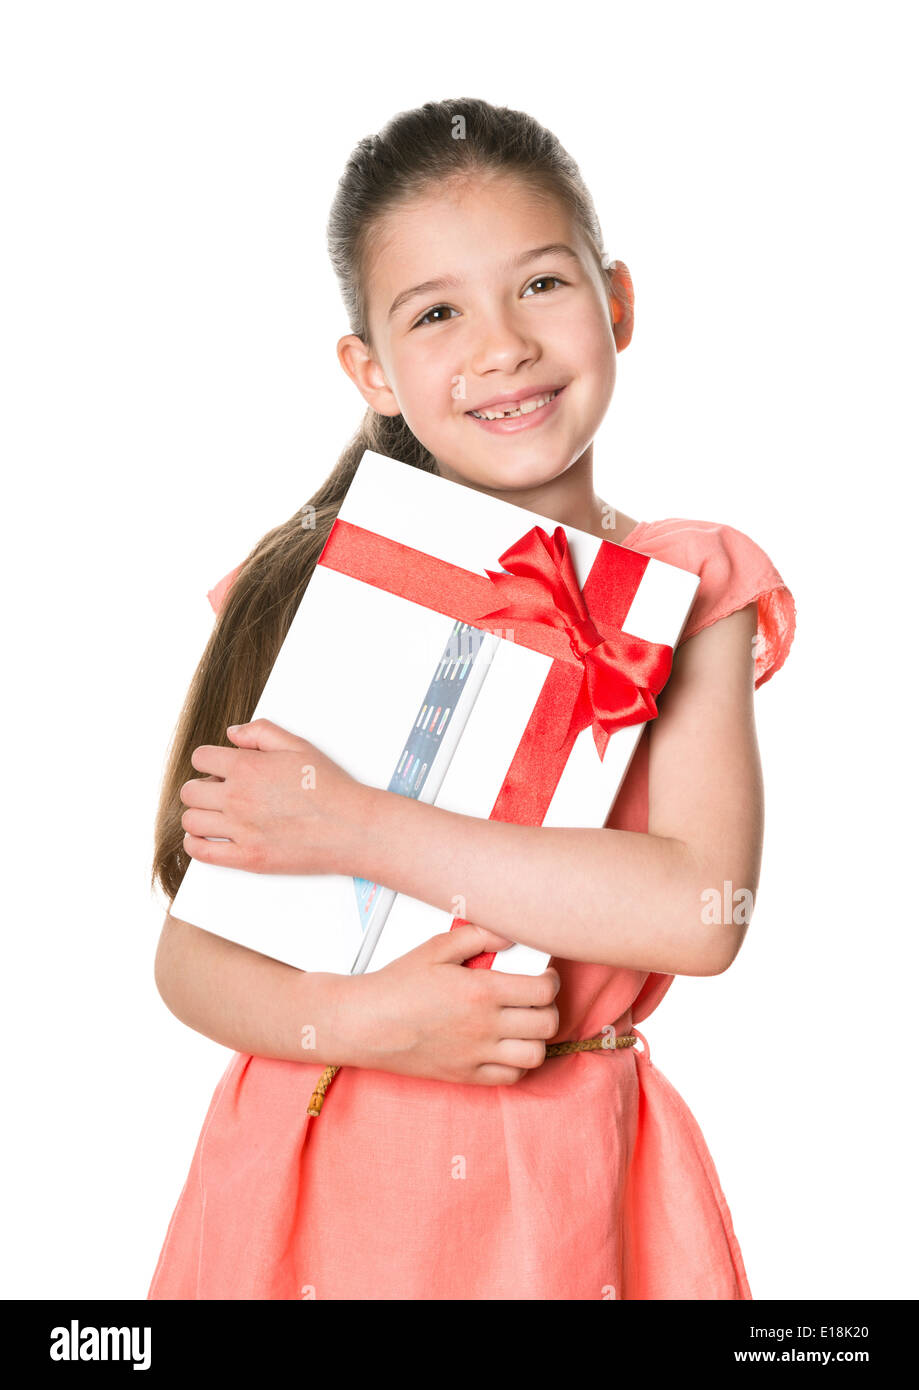 Smiling little girl holding in hands brand new Apple iPad Air as birthday present Stock Photo